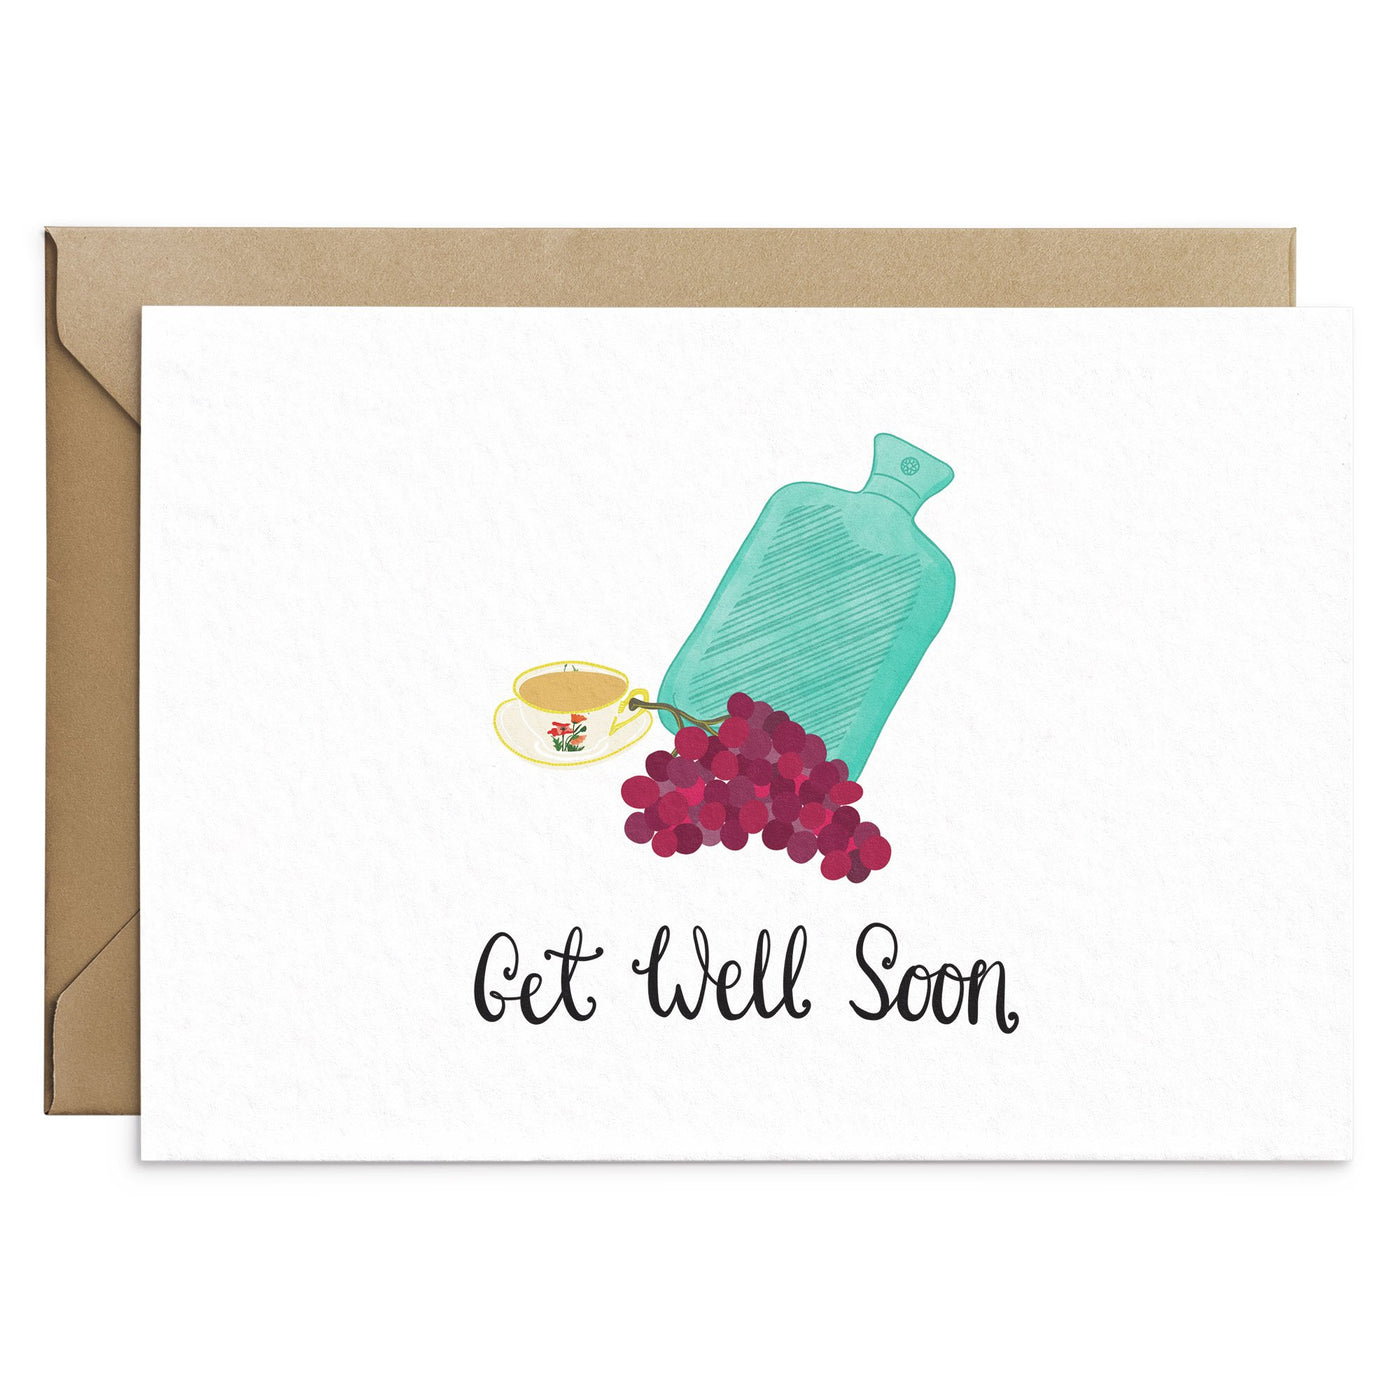 Get Well Soon Card - Poppins & Co.